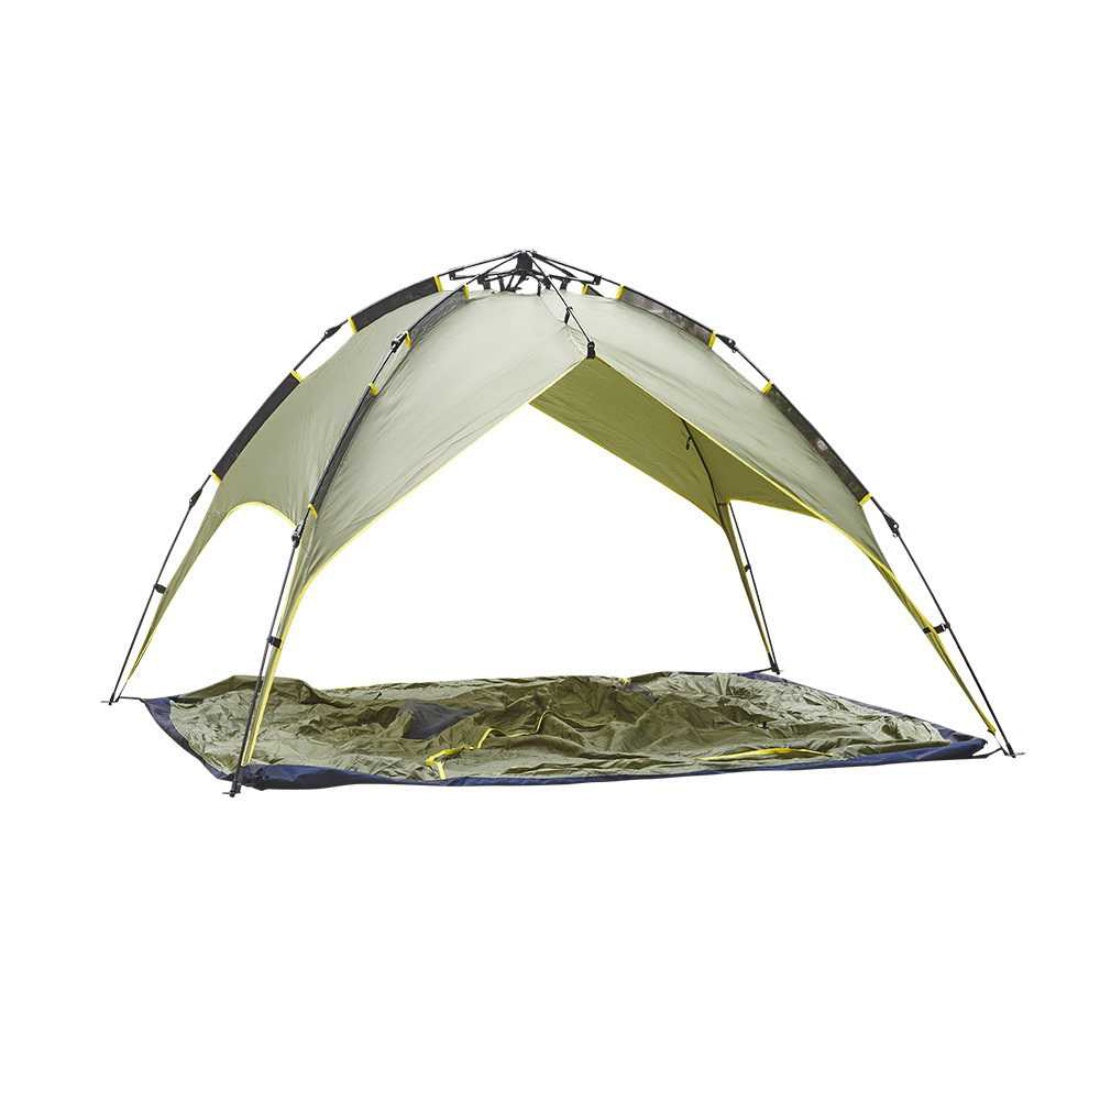 Instant Pop-Up Camping Tent - Classic Dome Style with Durable Polyester Fabric